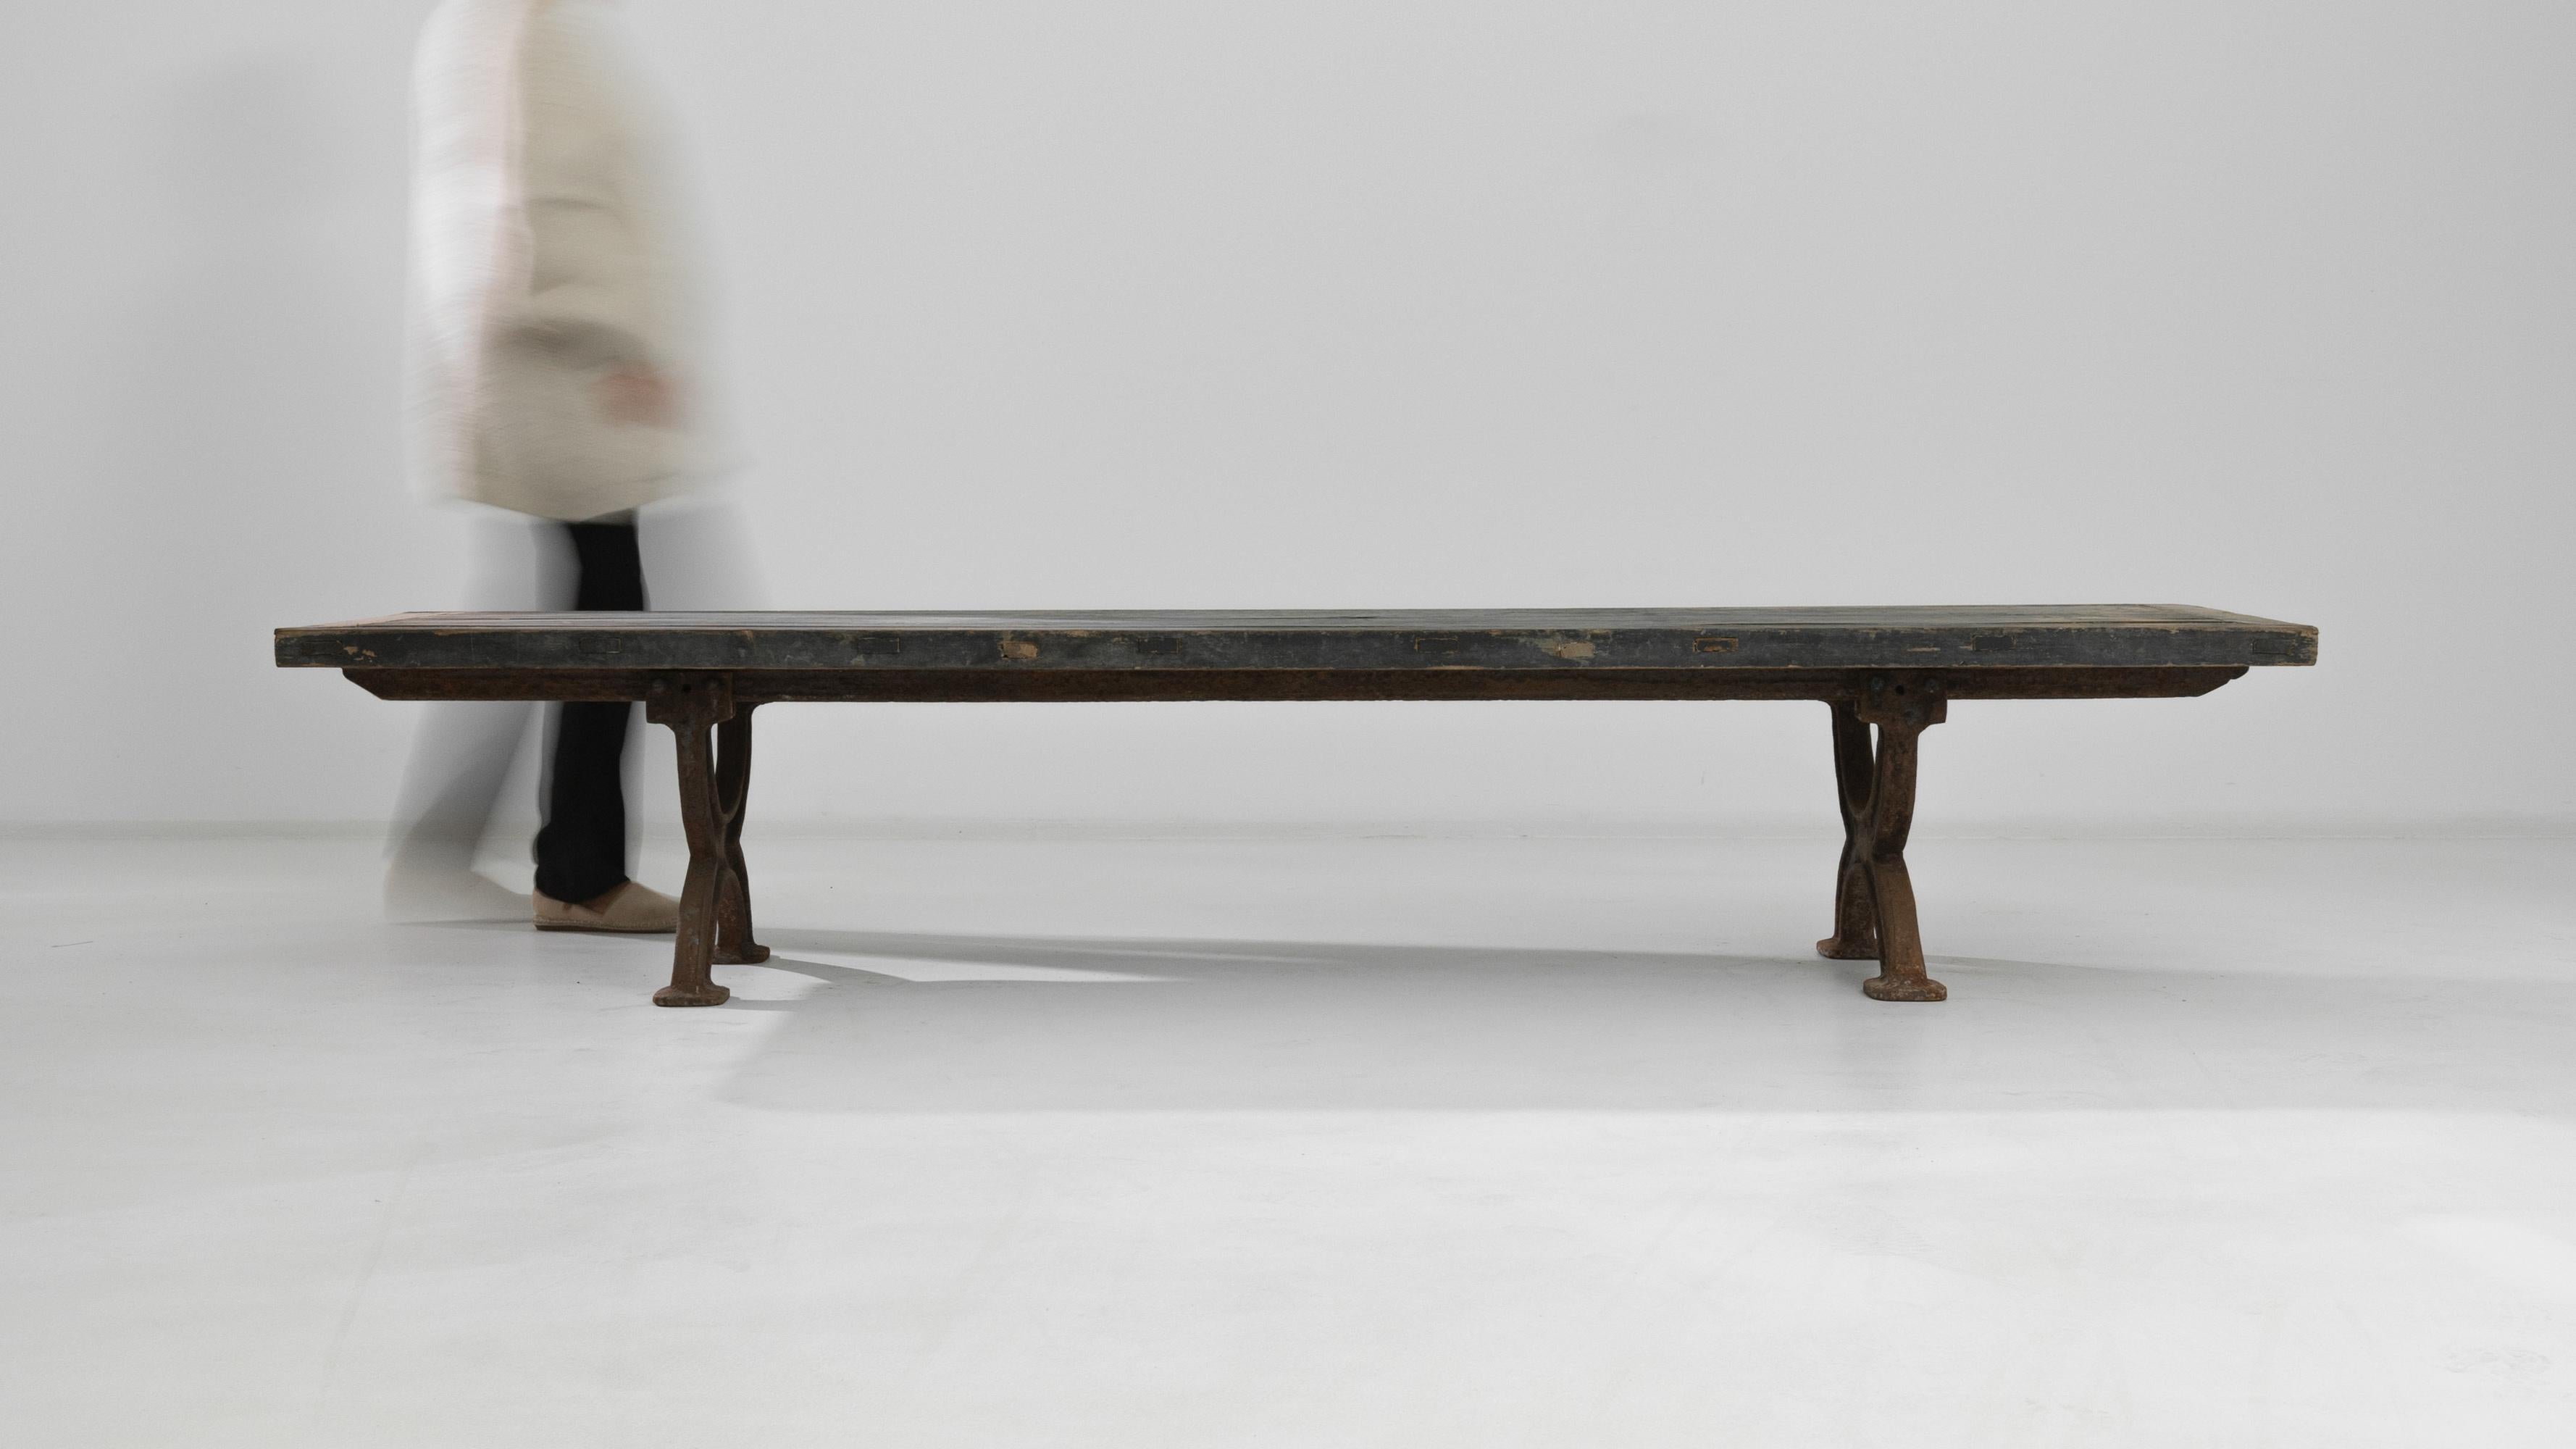 A cast iron coffee table with wooden top from France, produced circa 1900. Long and low-slung, this table with a cast iron frame sits heavy like an affixed bench. Featuring a pair of softly curved X supports connected by rust coloured stretchers,